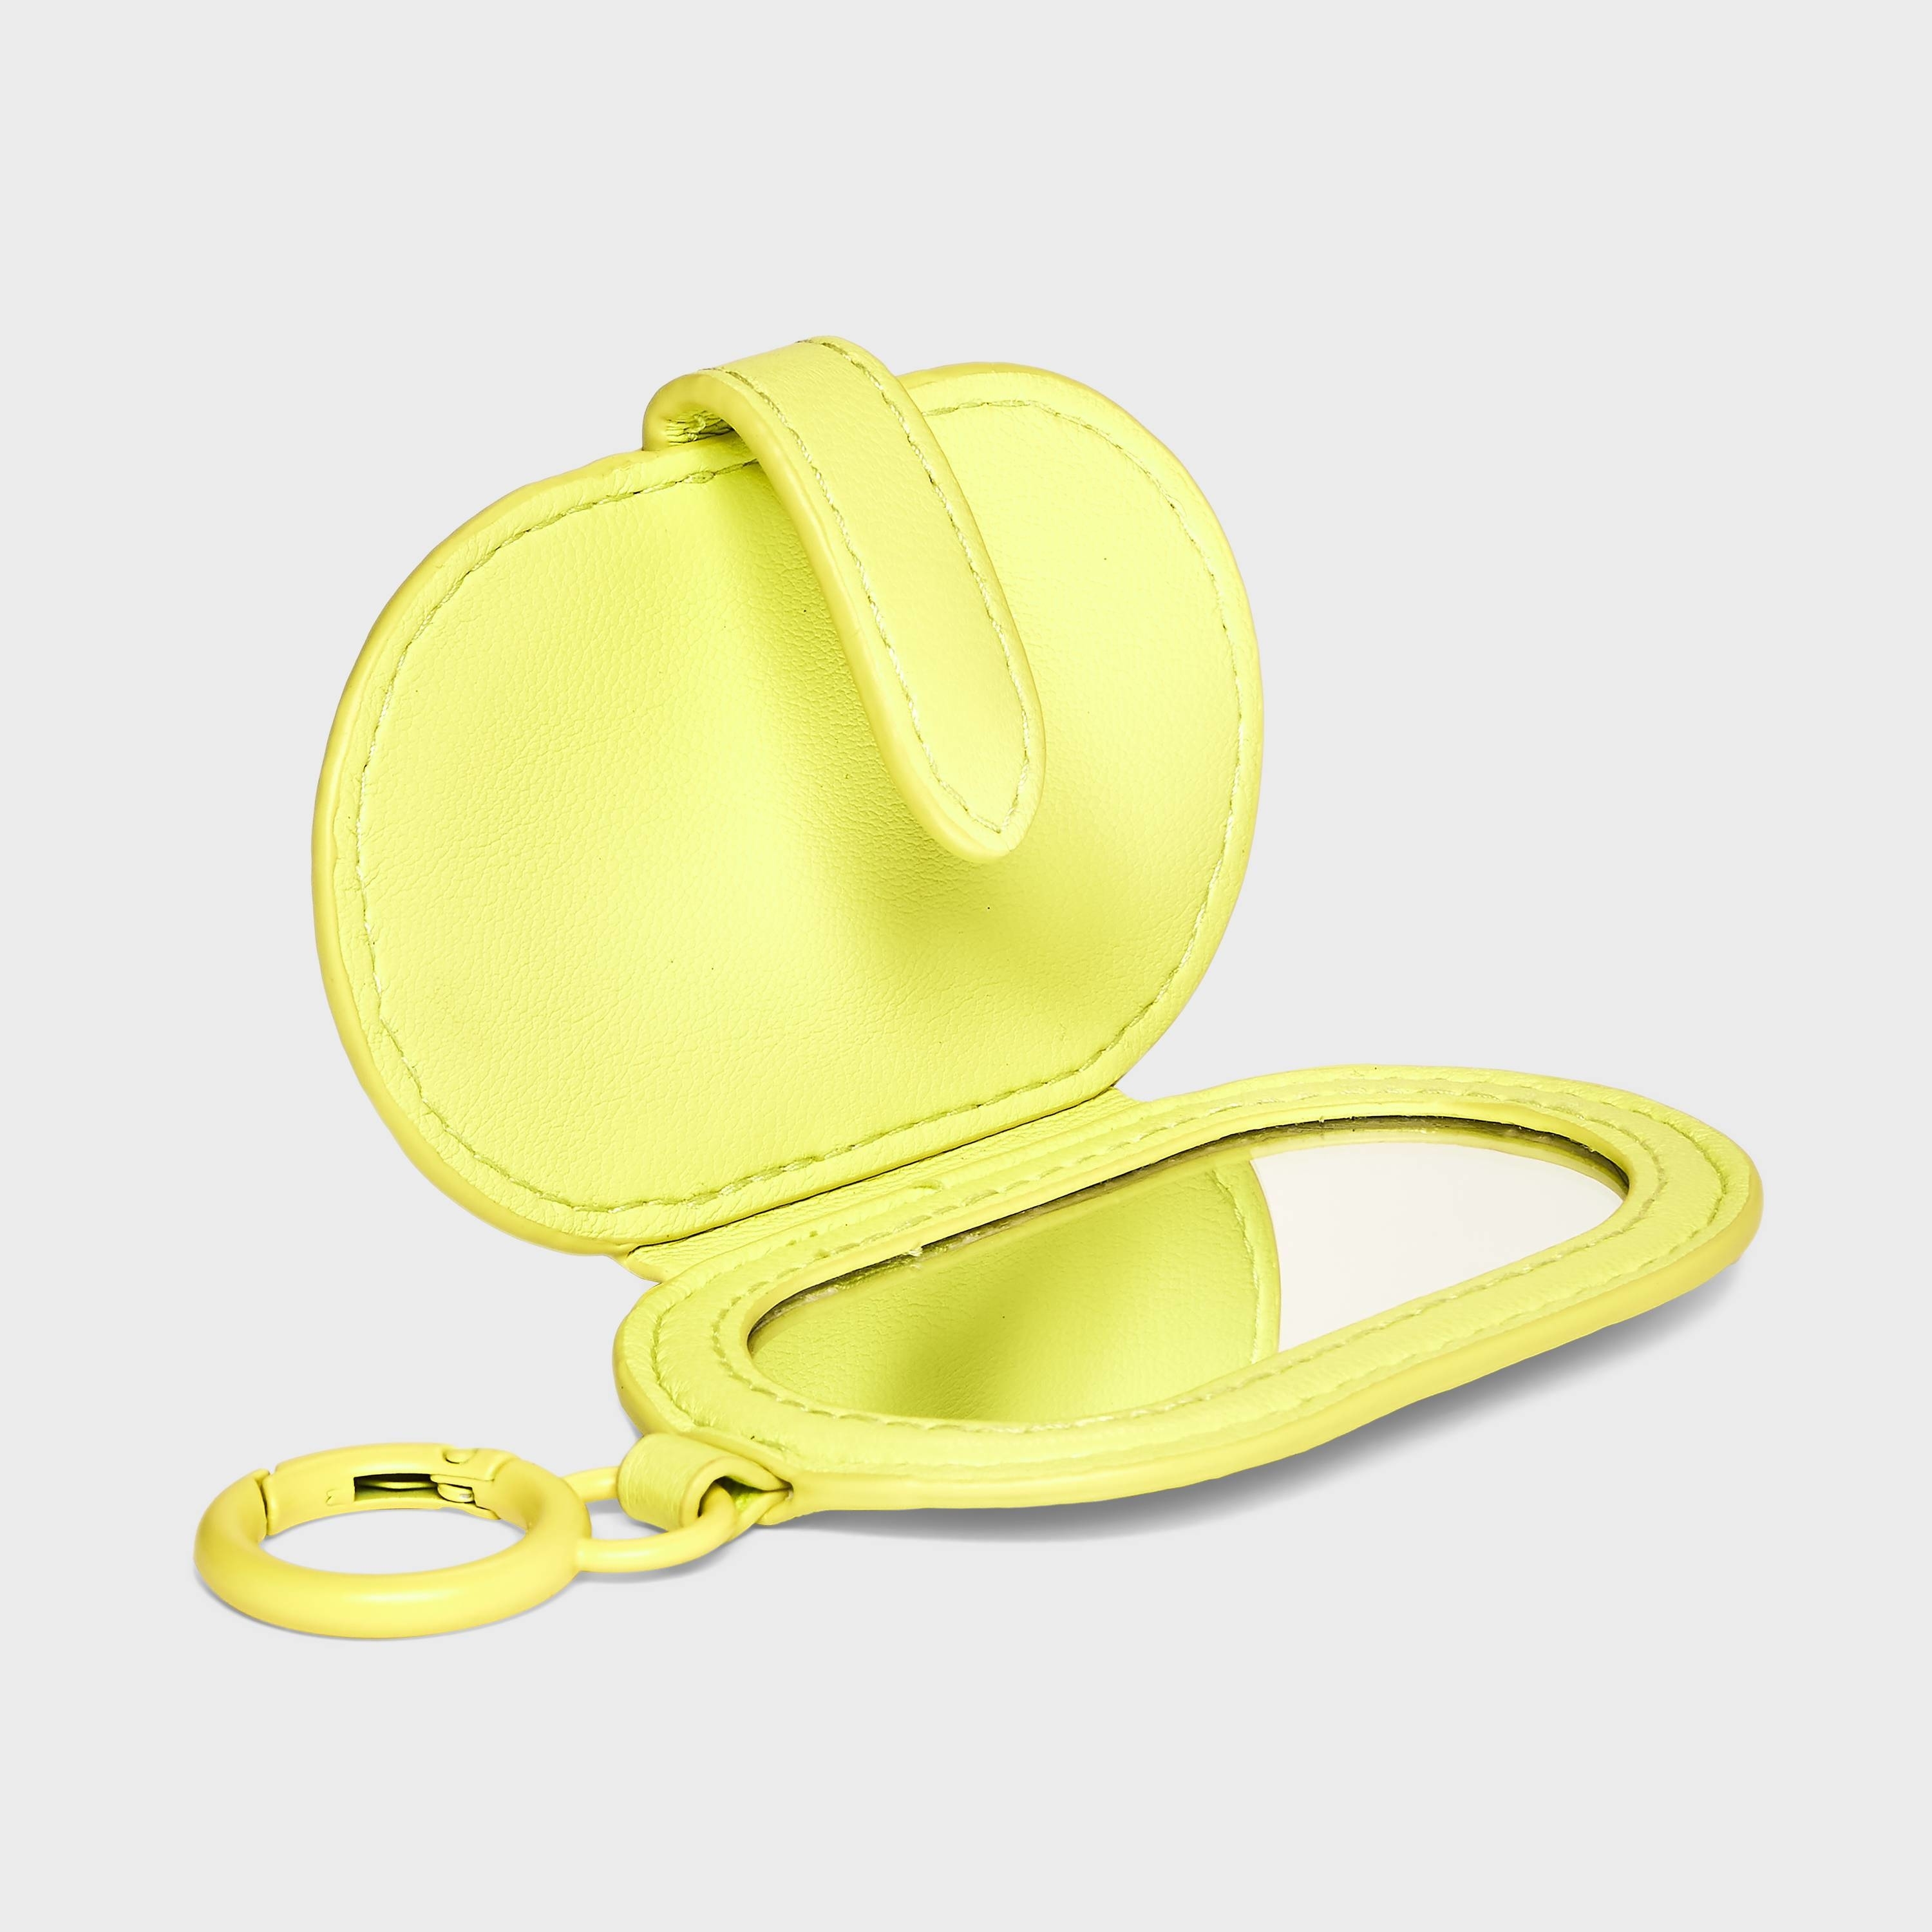 An oval-shaped yellow mirror accessory